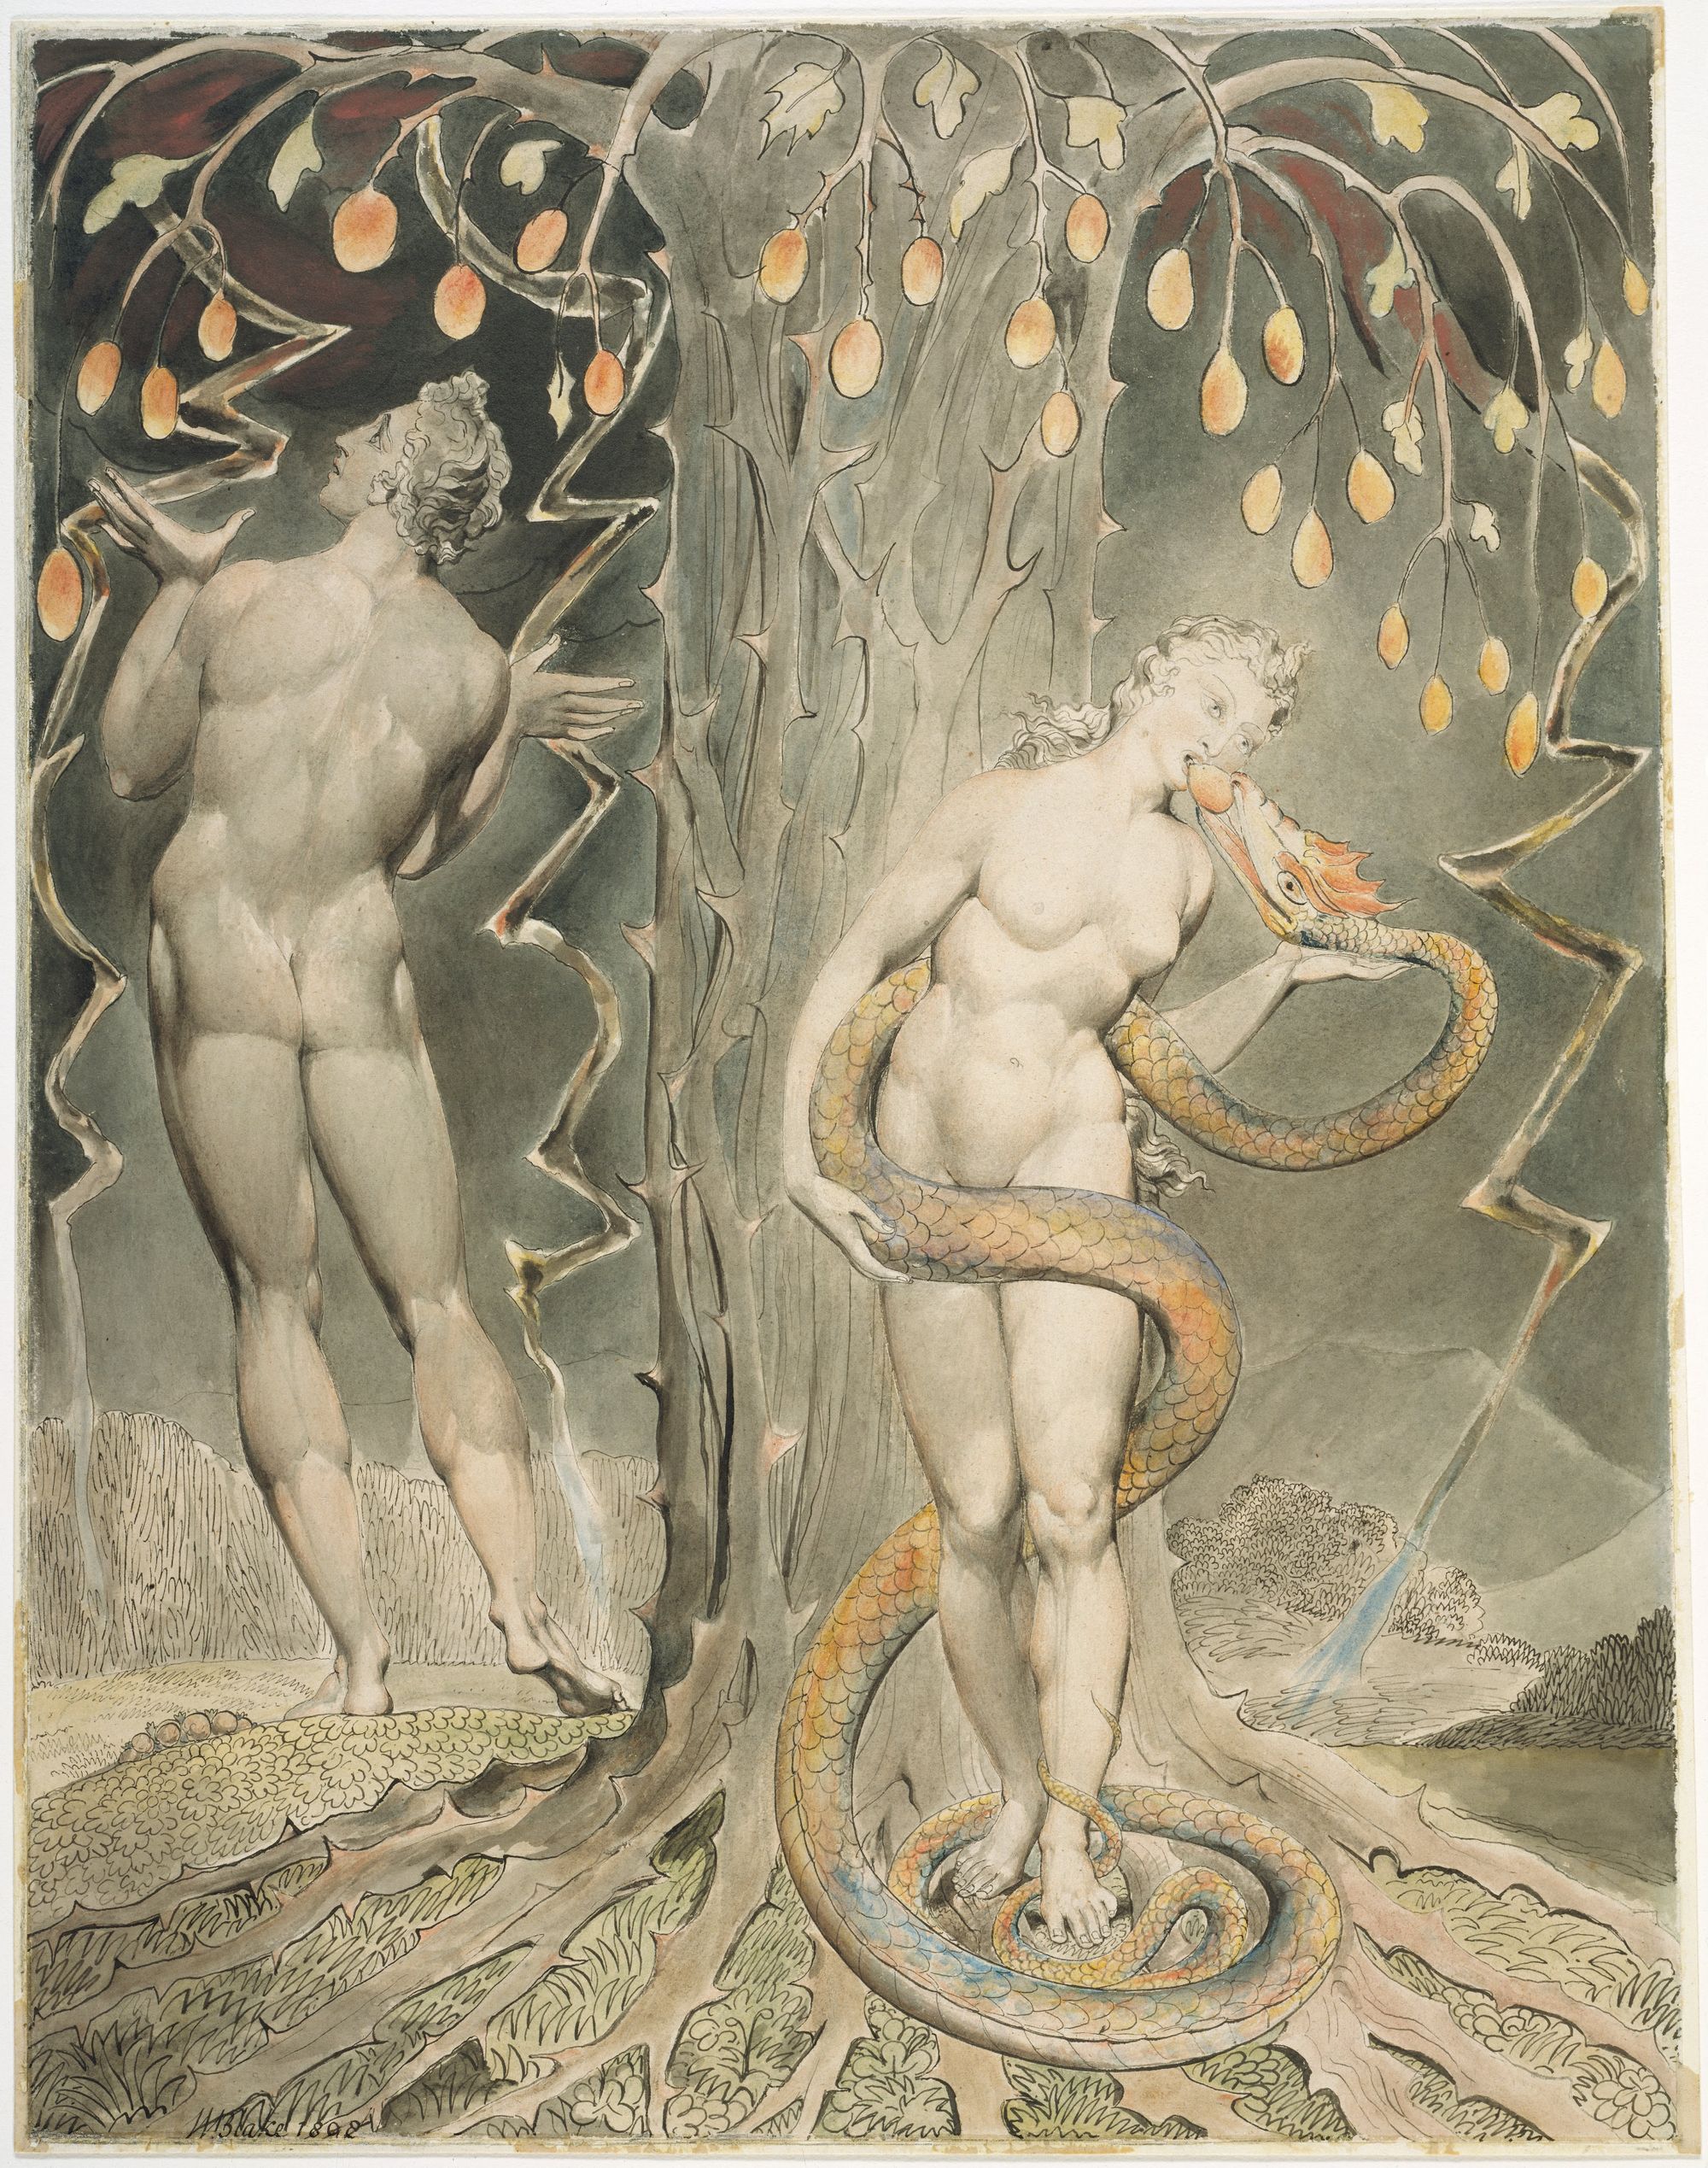 The Temptation and Fall of Eve by William Blake